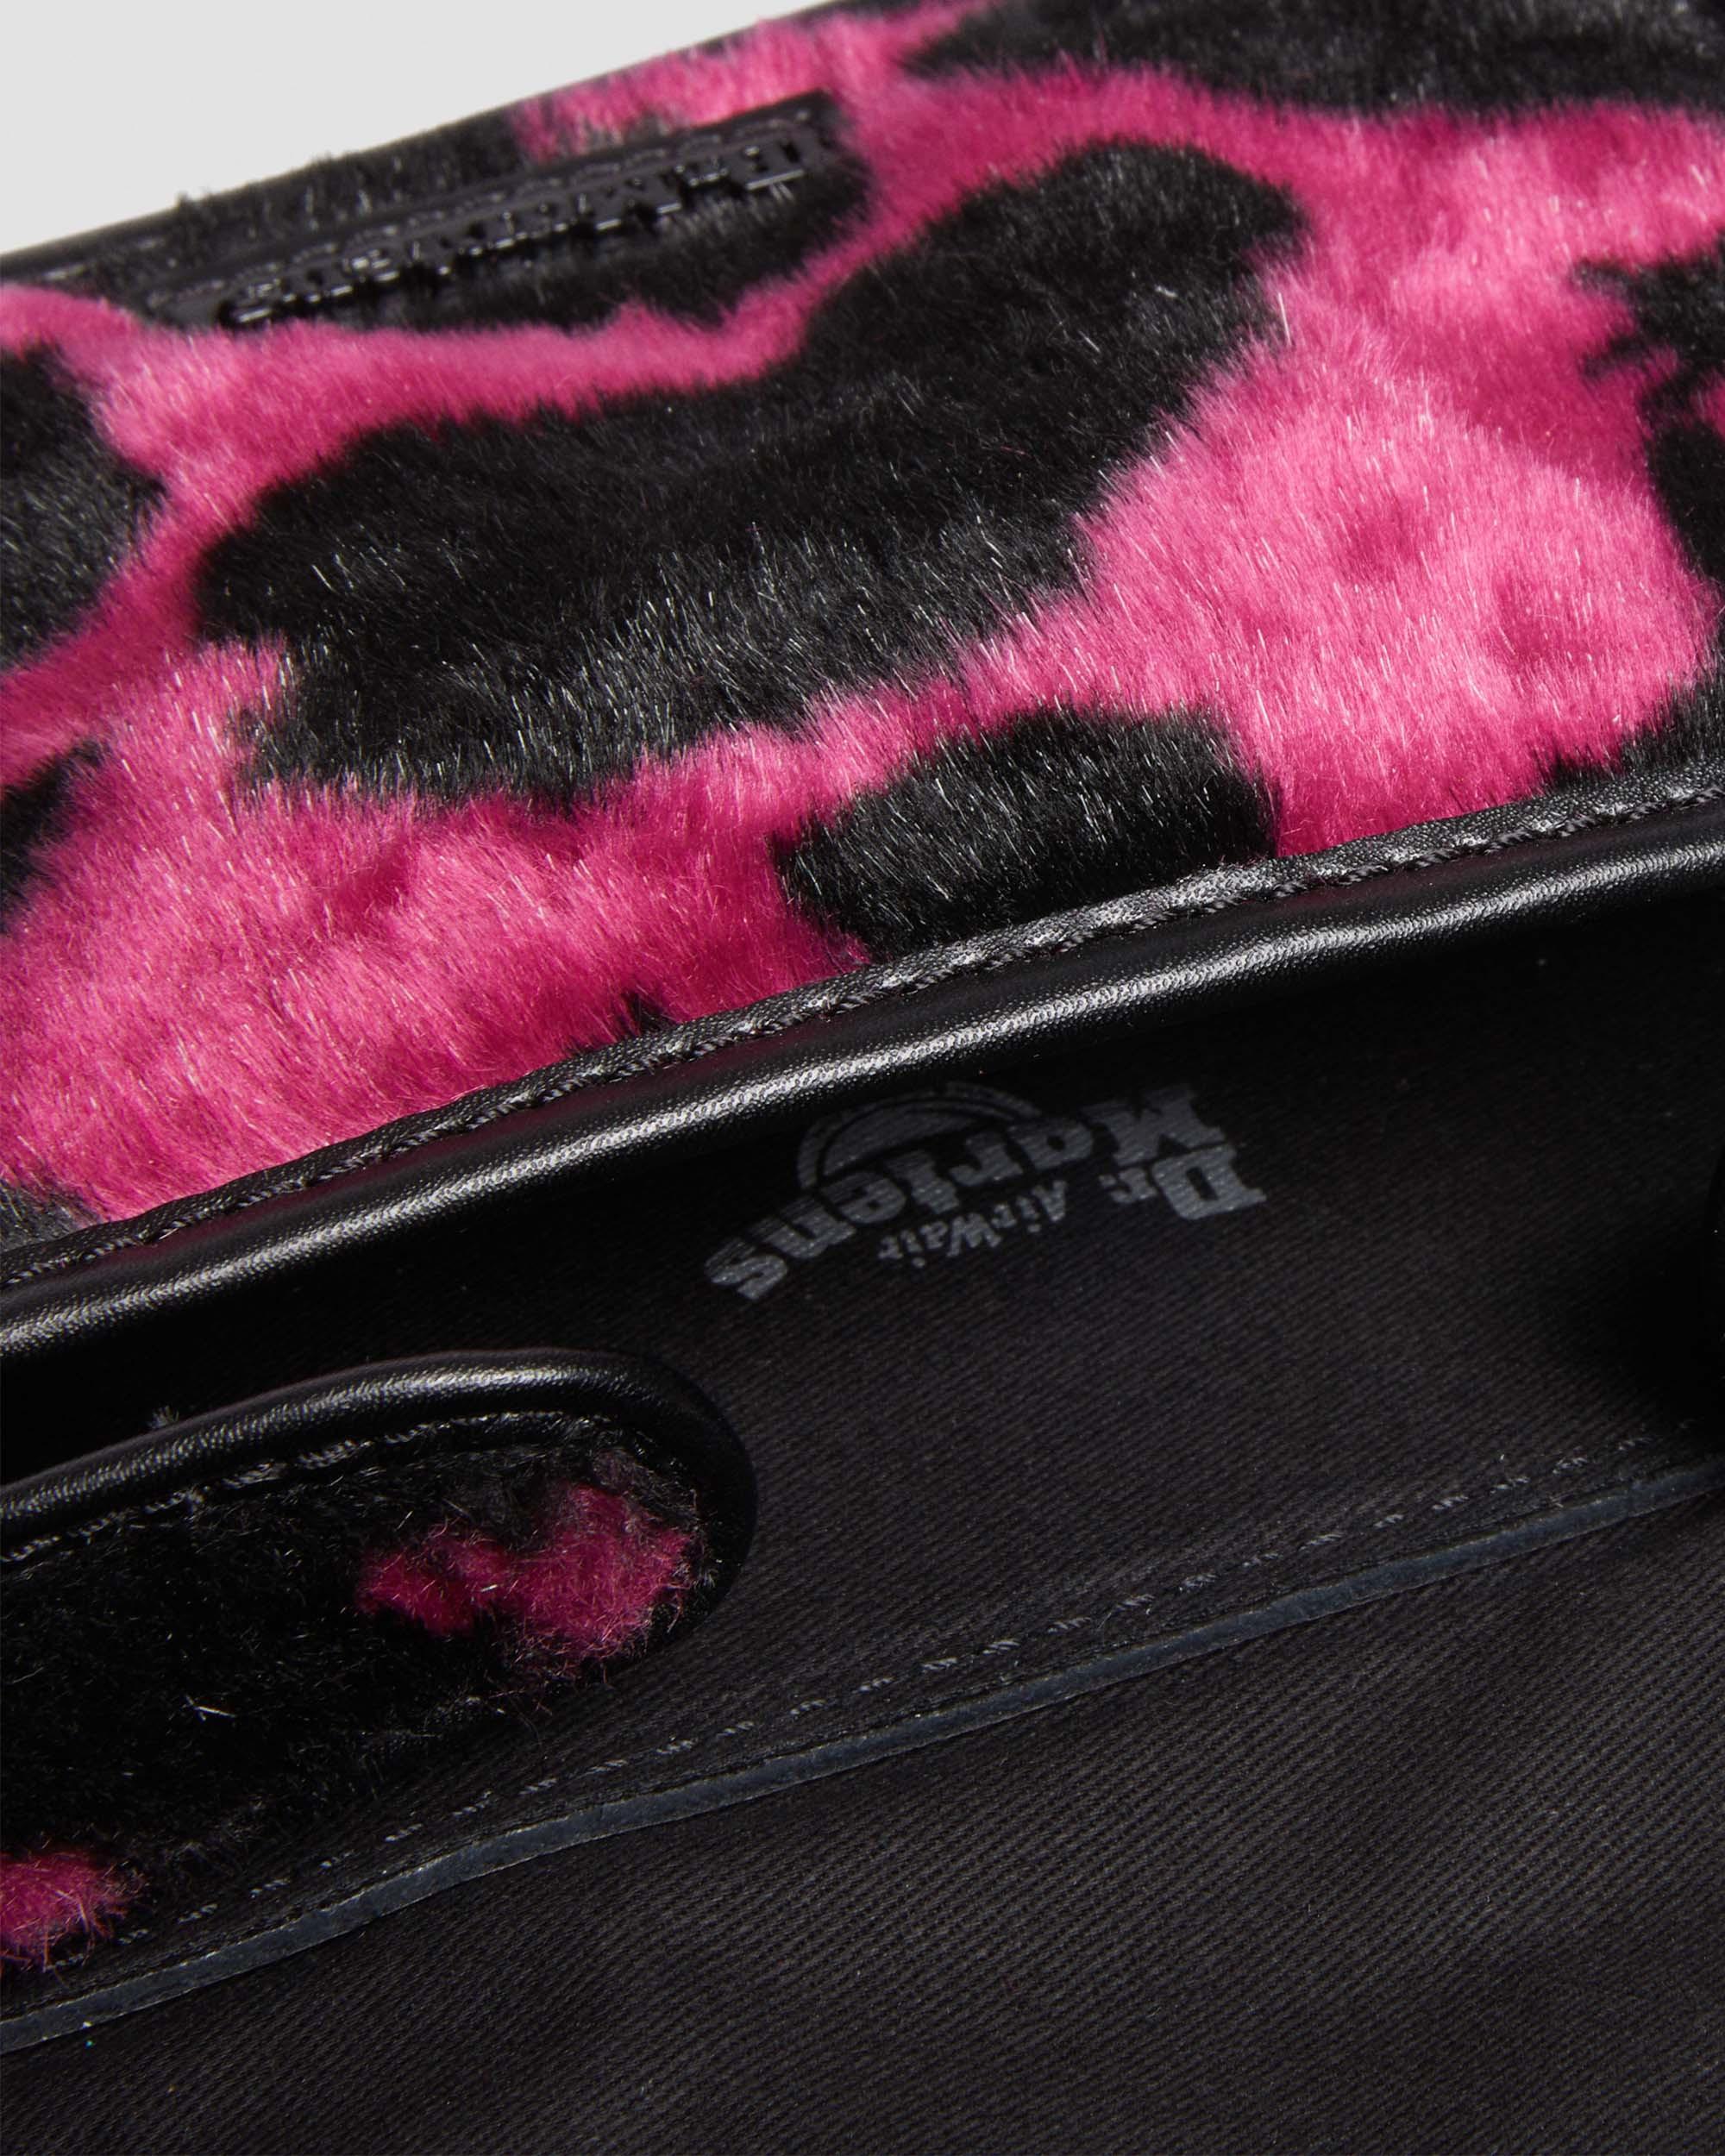 7 Inch Hair-On Cow Print Crossbody Bag in THRIFT PINK+BLACK